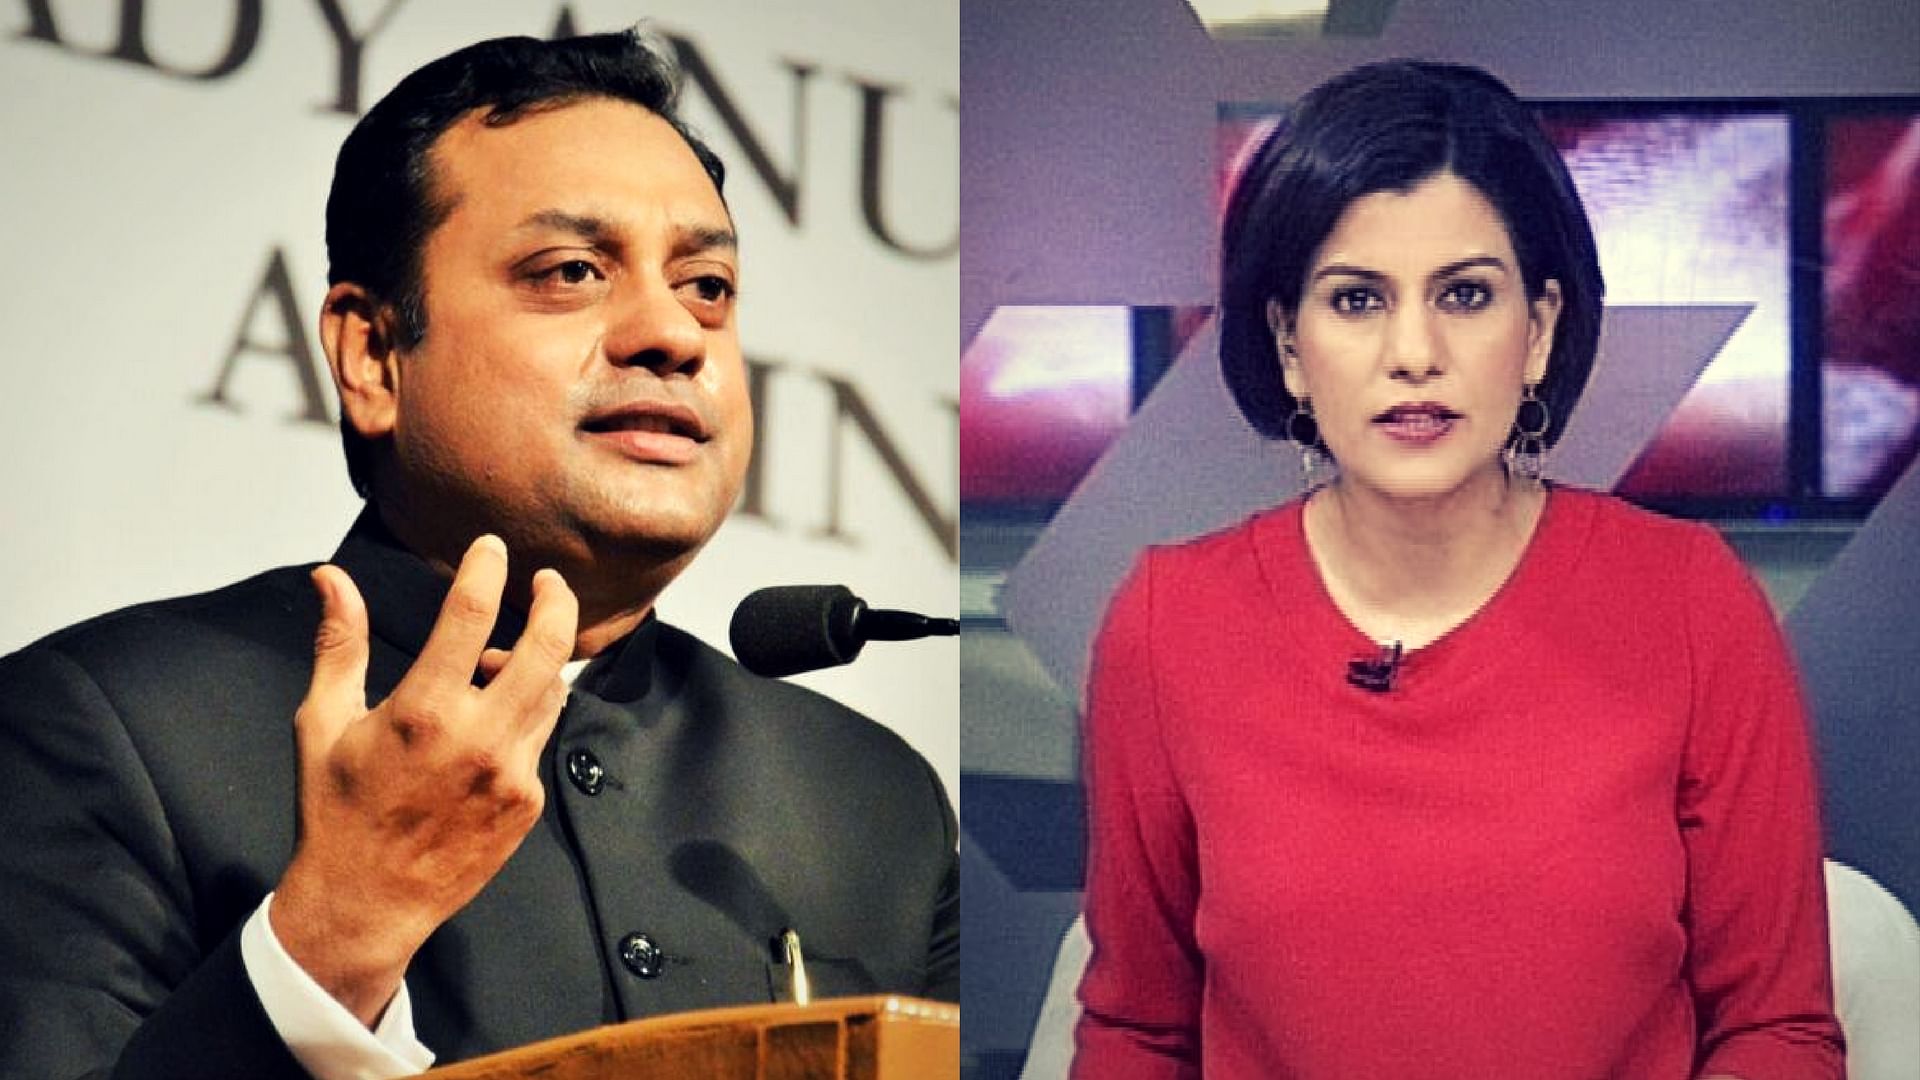 NDTV’s Nidhi Razdan (right) asked BJP’s Sambit Patra (left) to leave her show on NDTV. (Photo: Altered by <b>The Quint</b>)